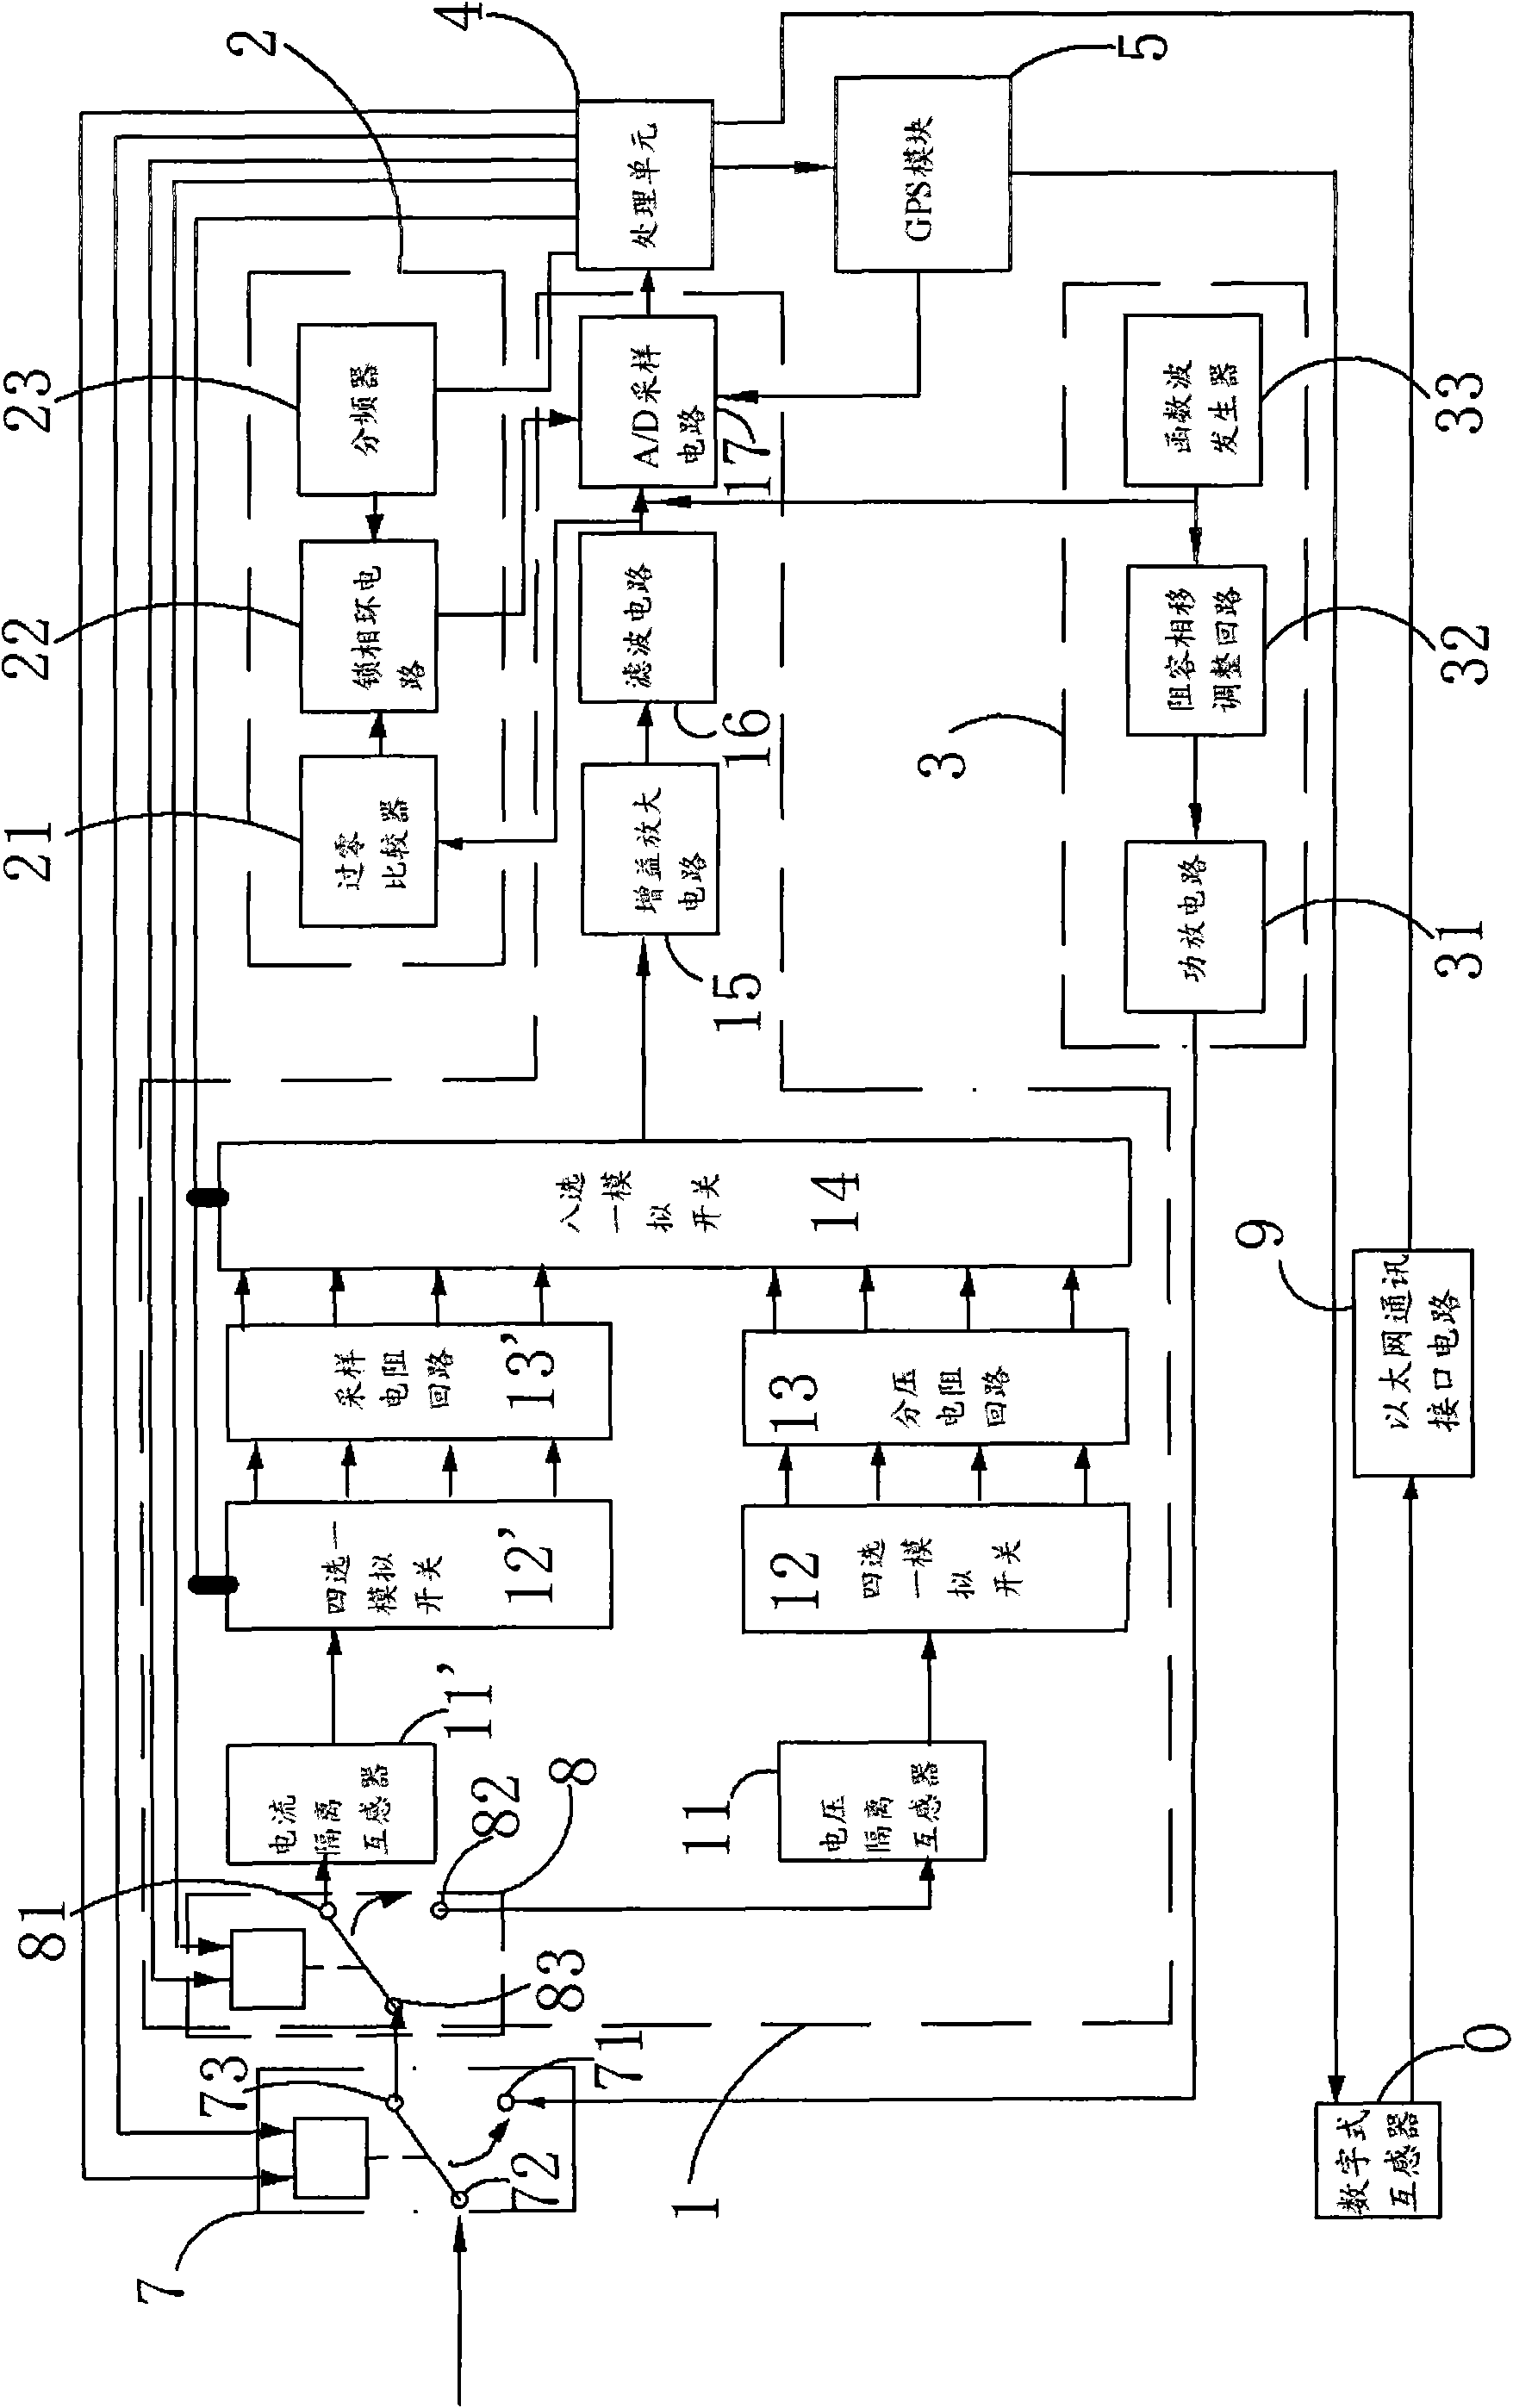 Device for measuring and checking errors of digital mutual inductor